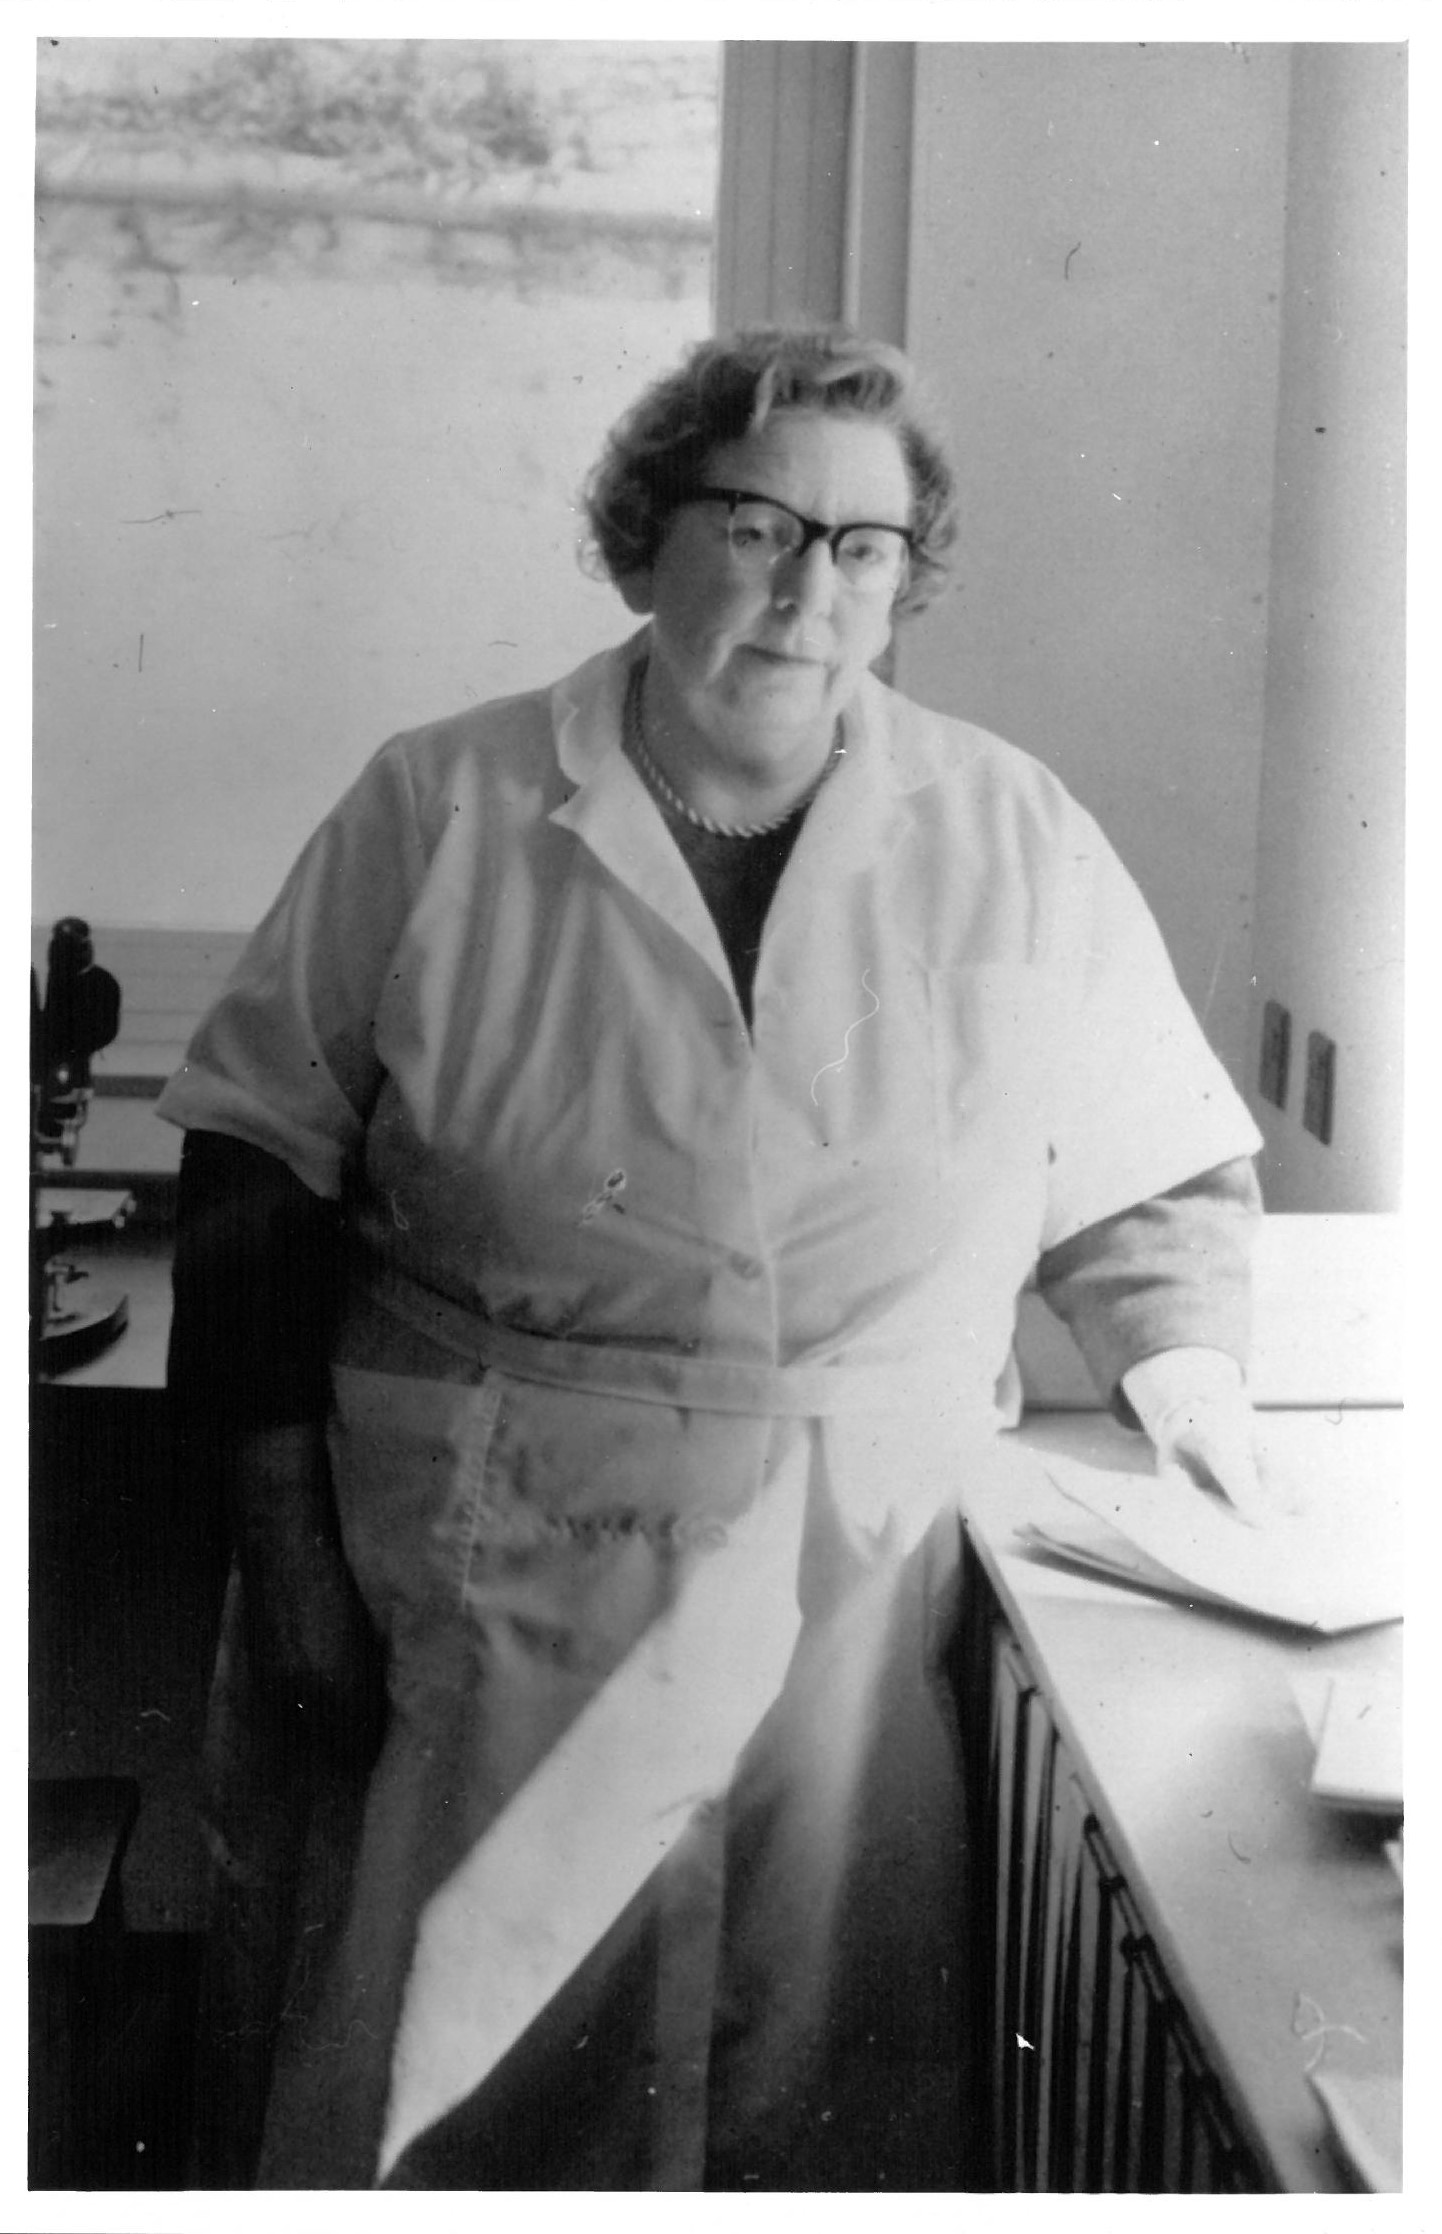 A black-and-white photograph of a woman wearing glasses and a white lab coat.